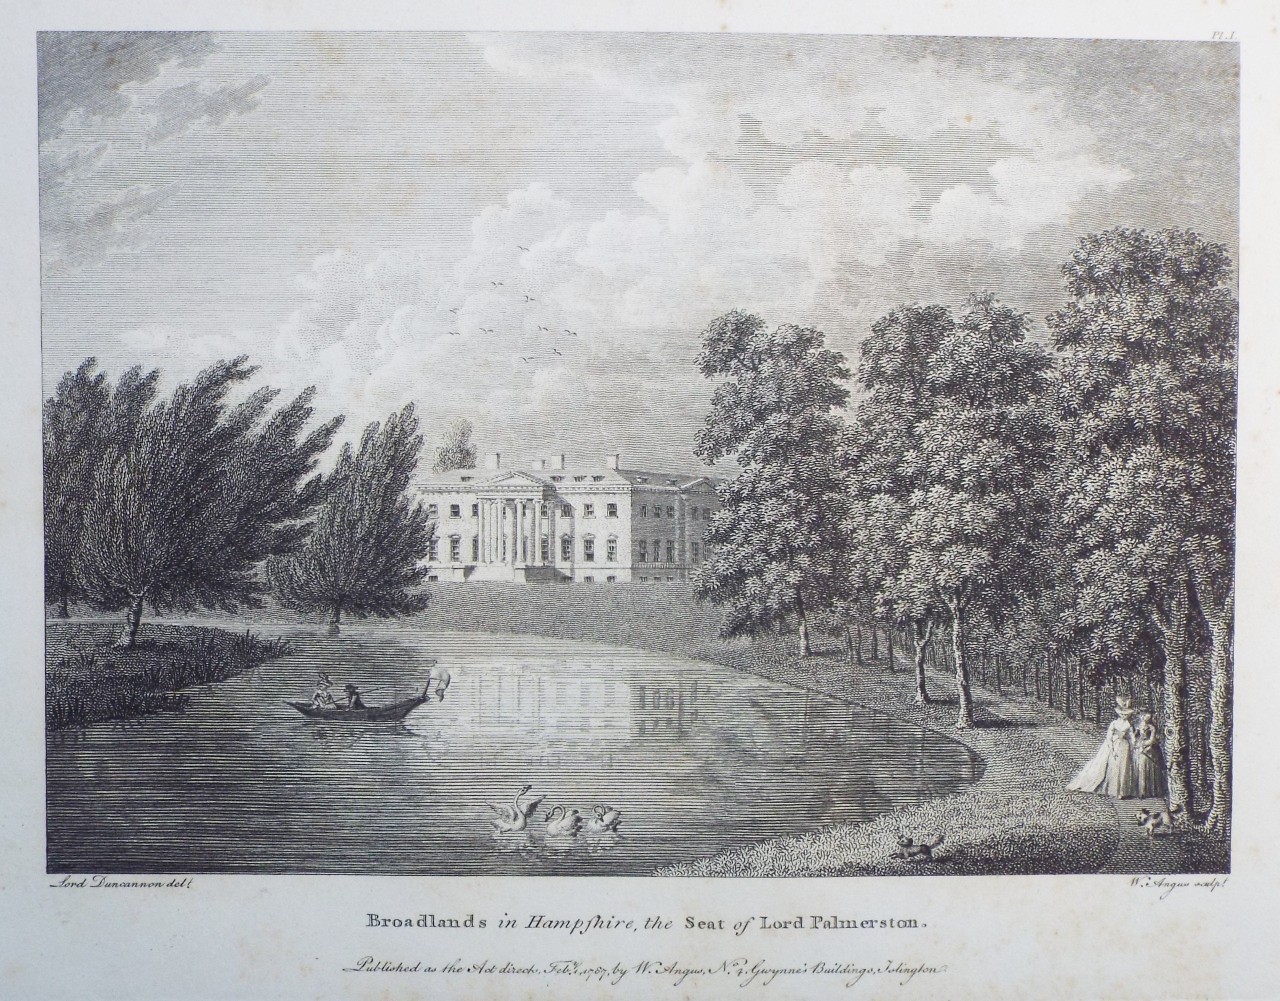 Print - Broadlands in Hampshire, the Seat of Lord Palmerston. - Angus